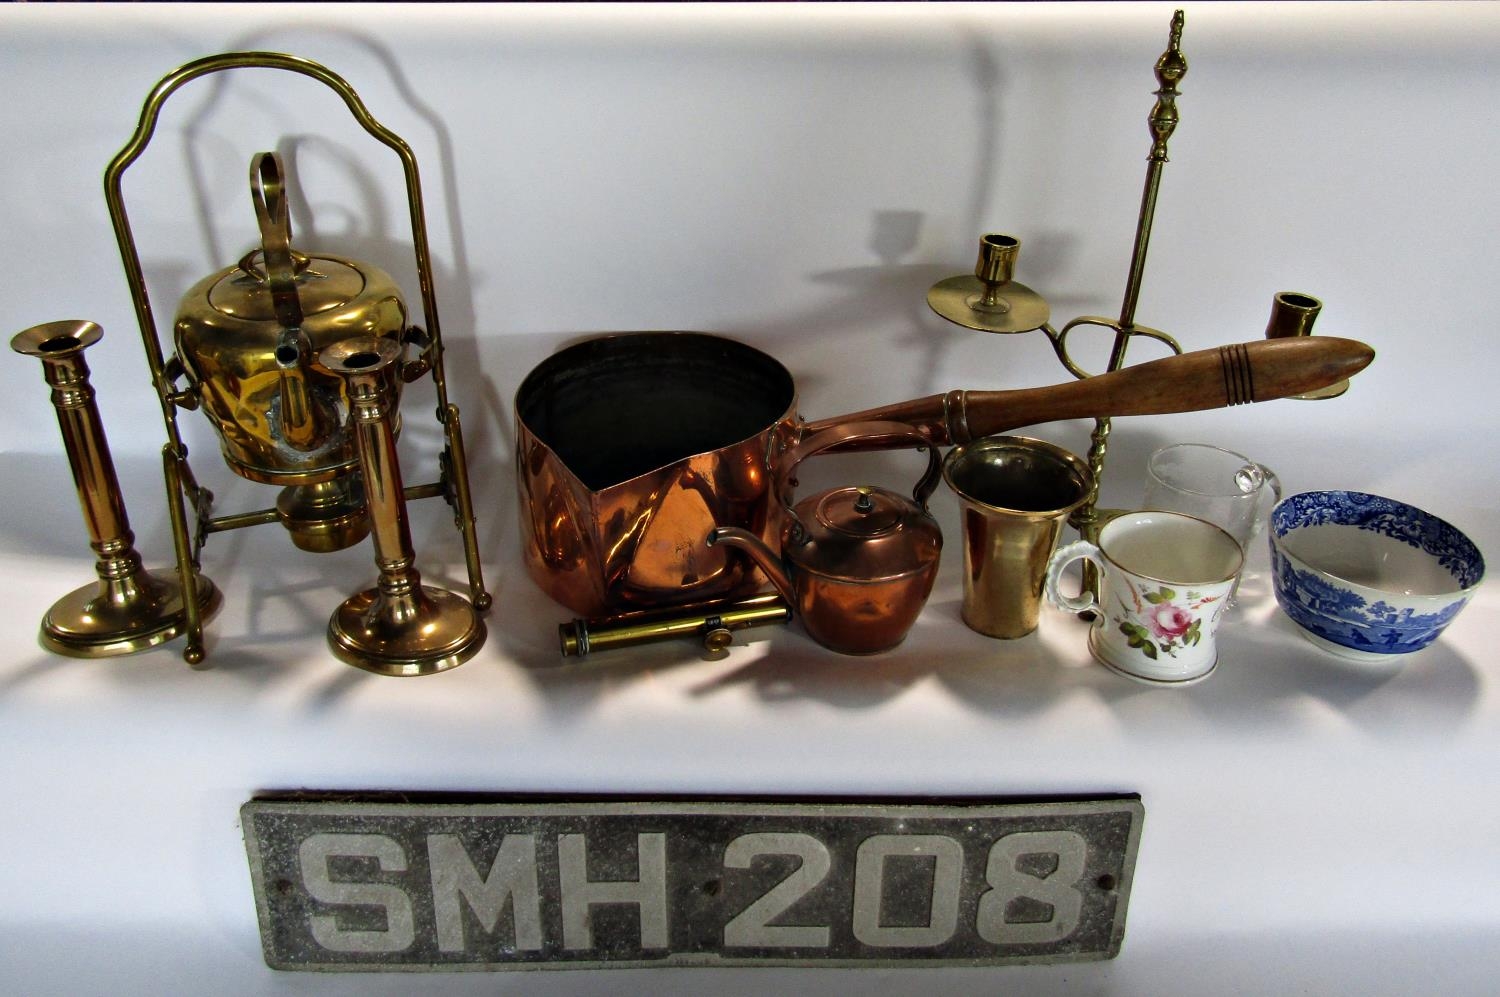 A mixed selection of copper and brassware including brass kettle on stand, copper kettle, a copper